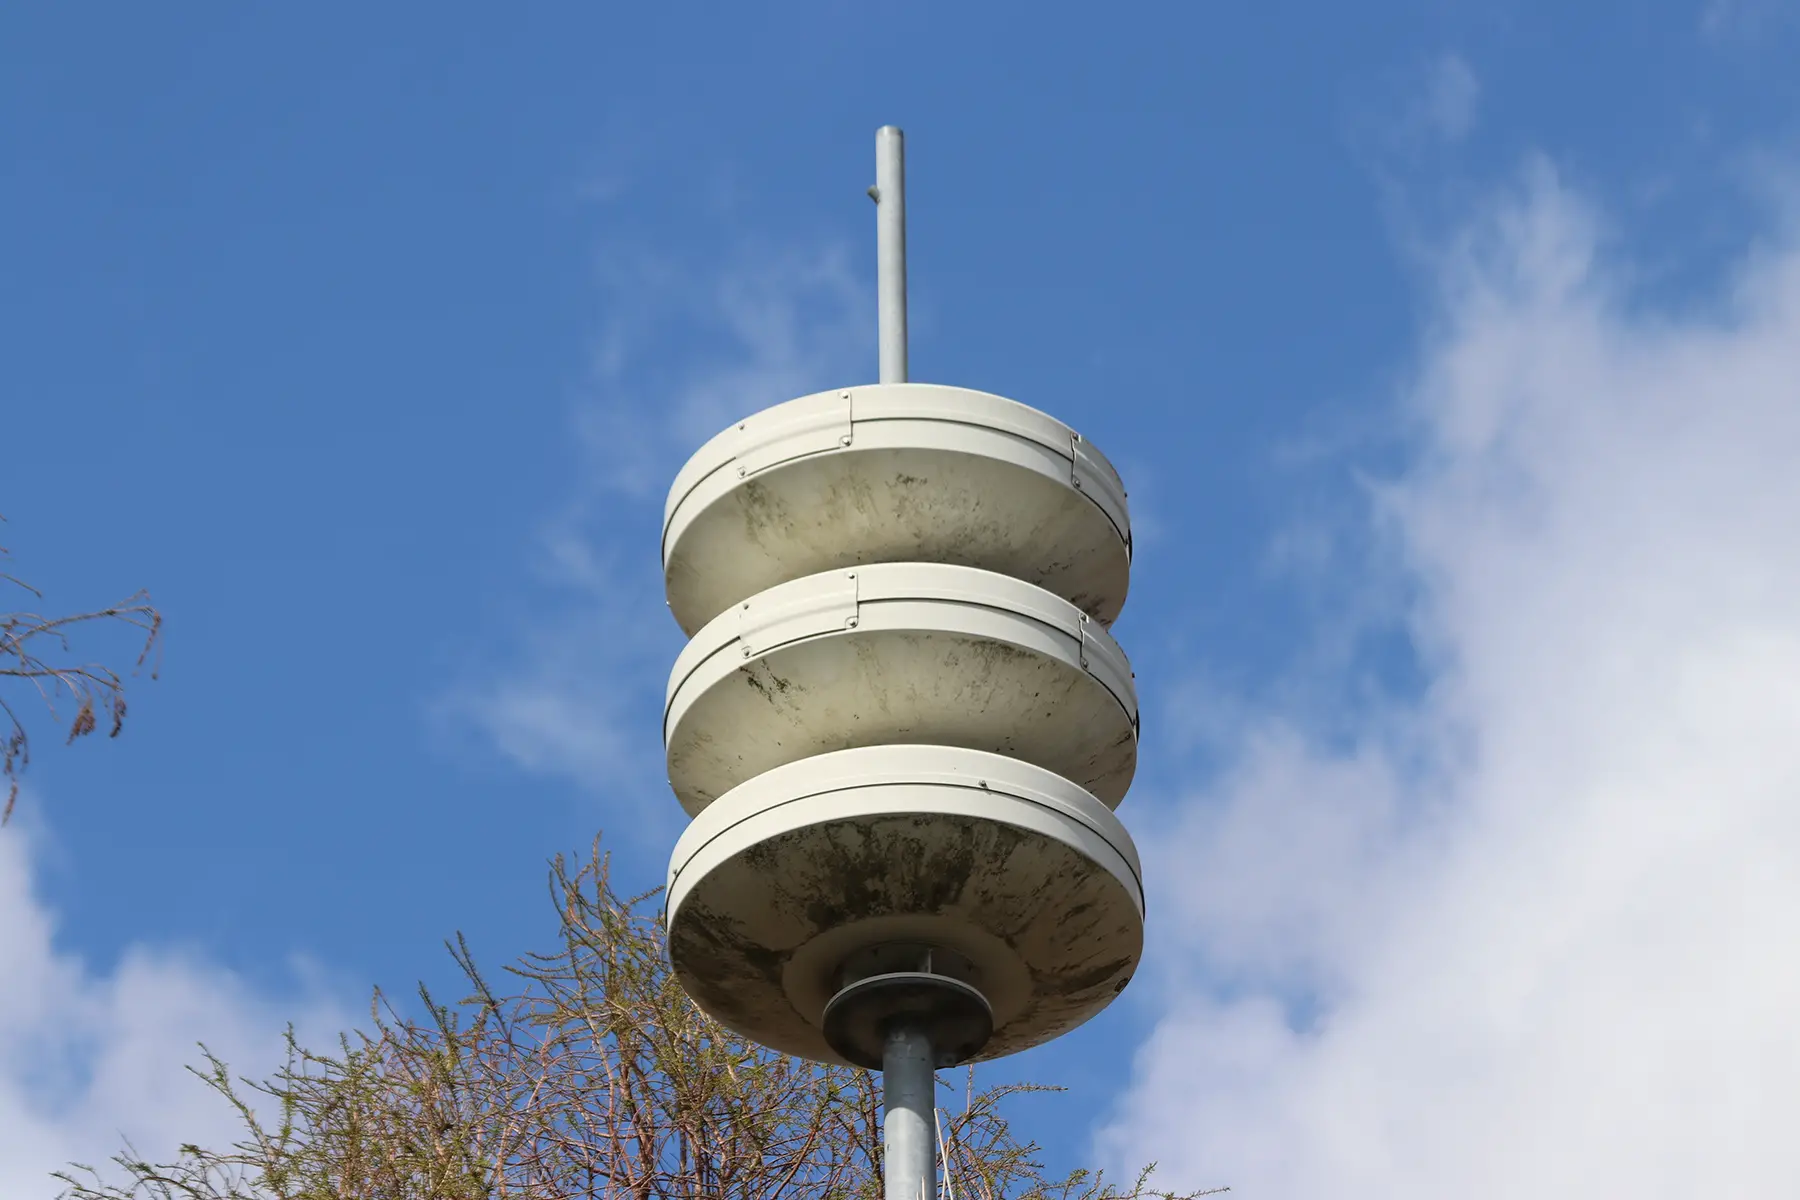 A typical Luchtalarm pole in the Netherlands